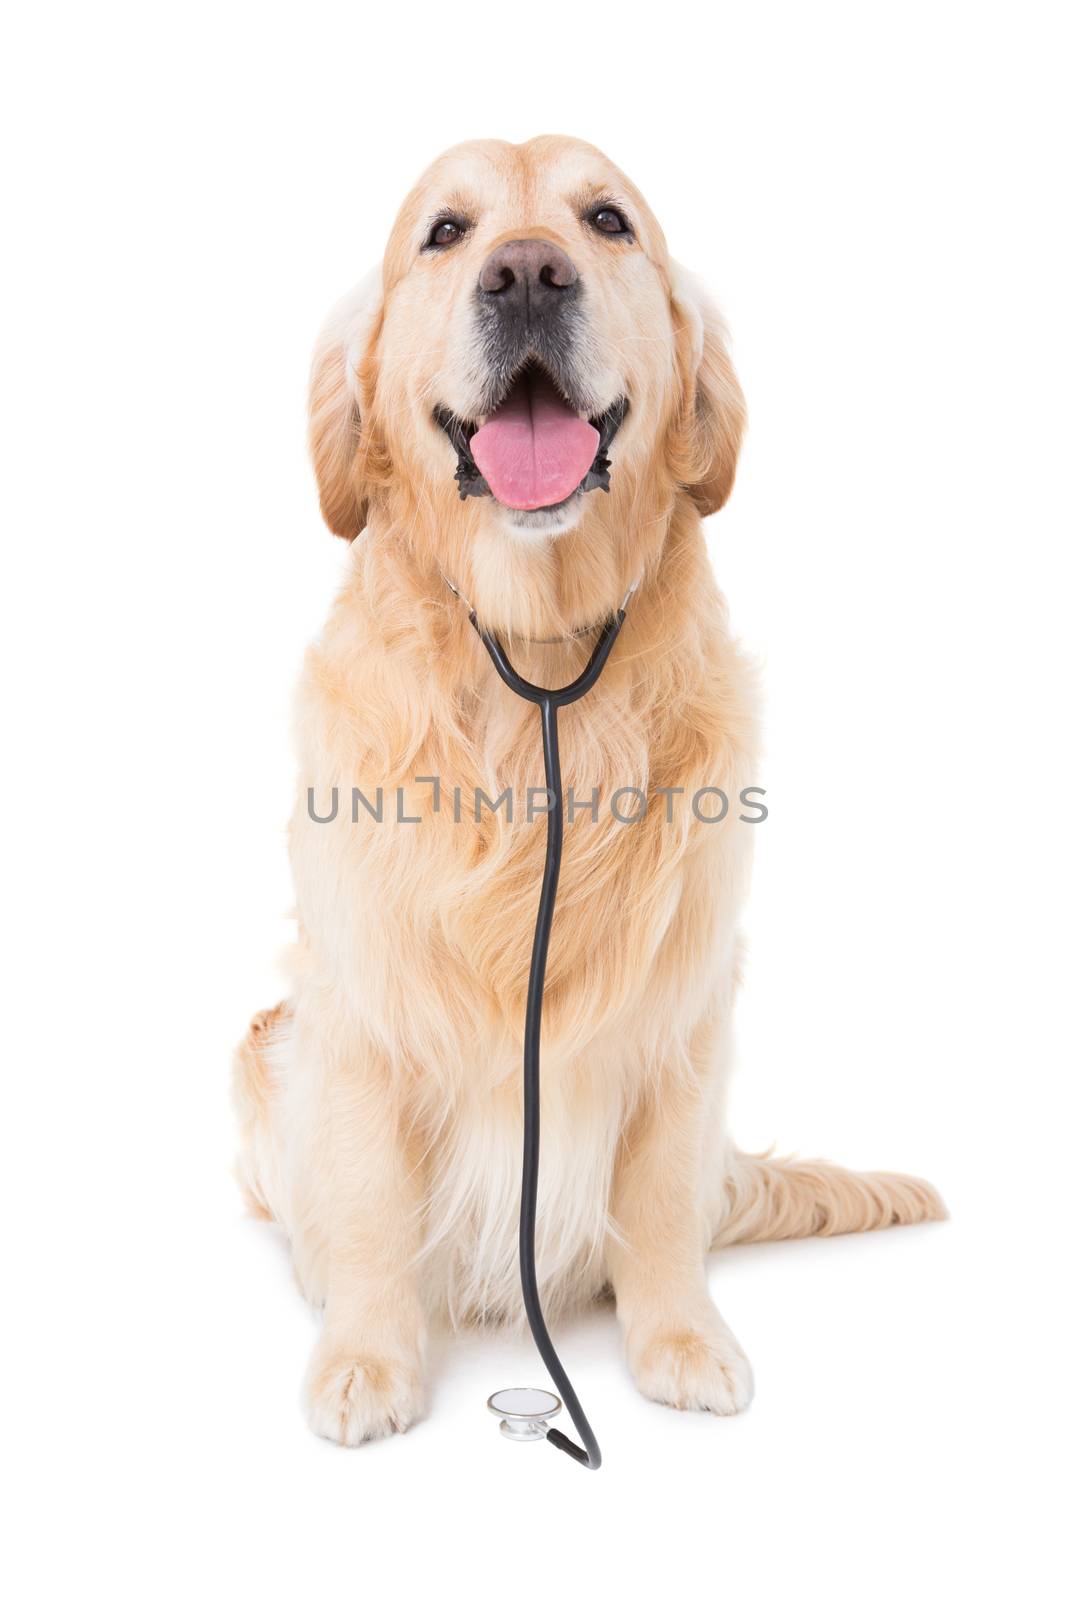 Dog with stethoscope looking at camera  by Wavebreakmedia